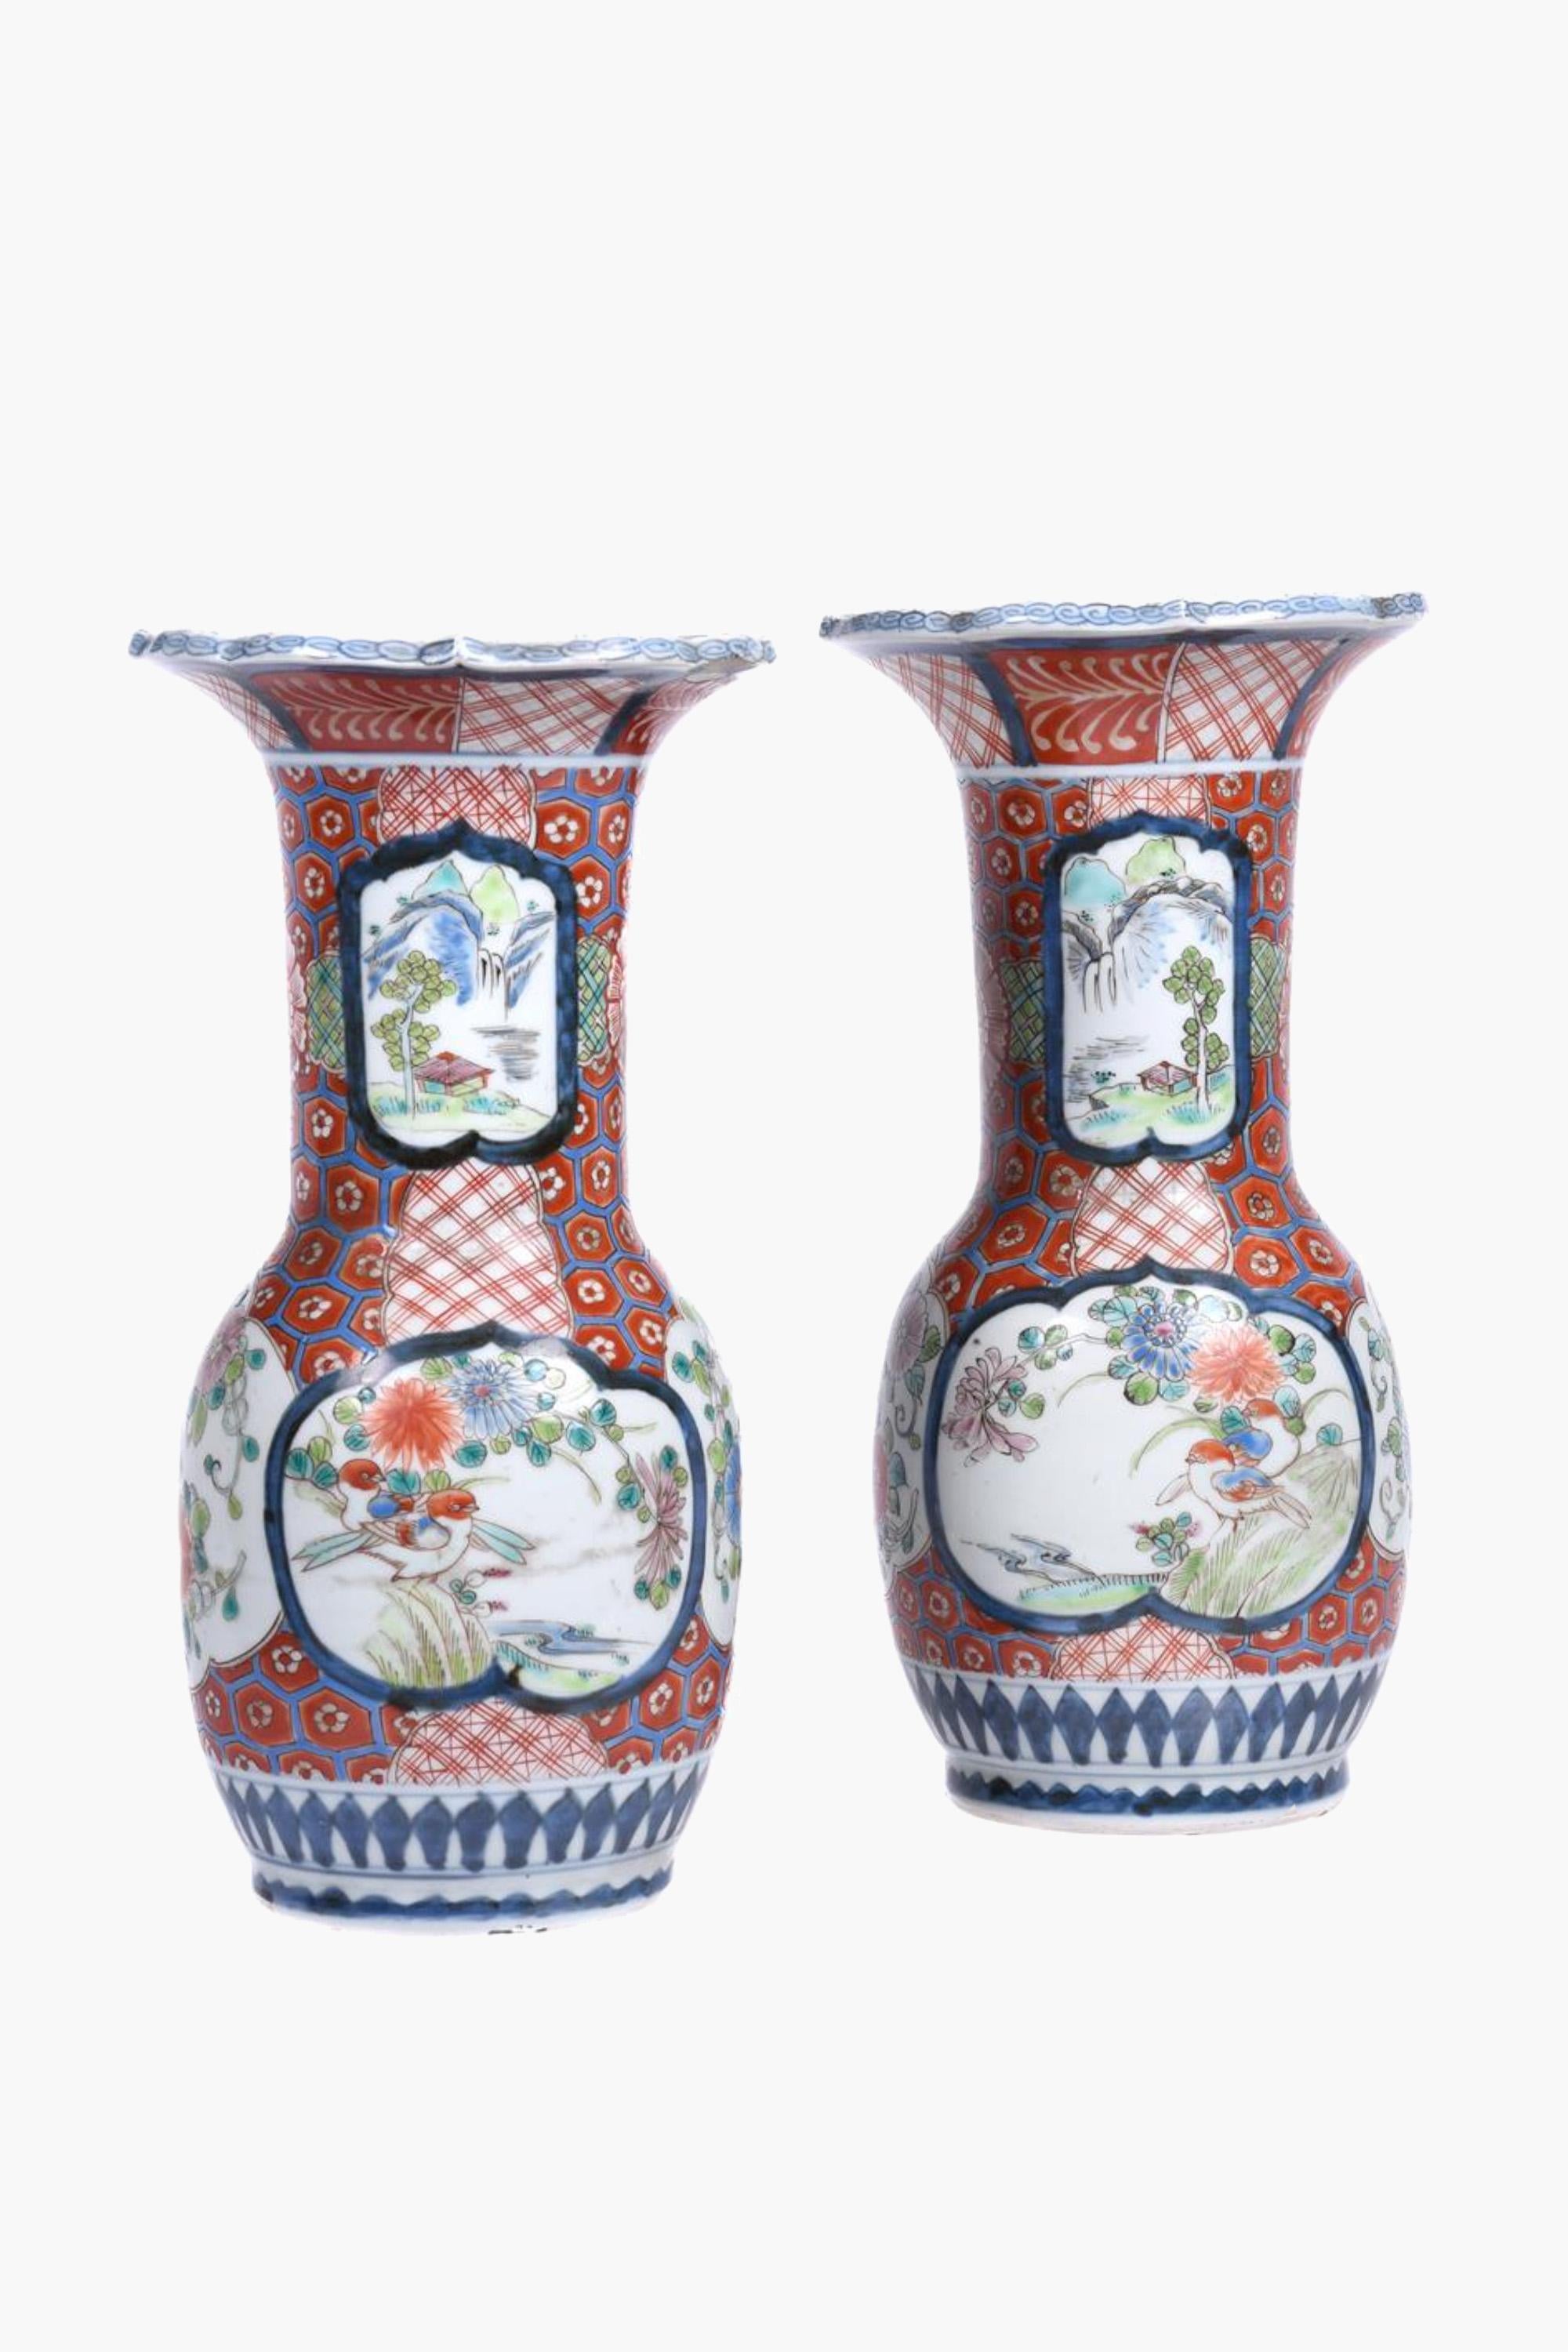 A pair of antique Japanese Arita Imari porcelain vases, available as lamps.

Meiji period (1868-1913) Japanese porcelain vases decorated in bright enamels in Imari colours. The body is decorated with alternating vignettes depicting Japanese